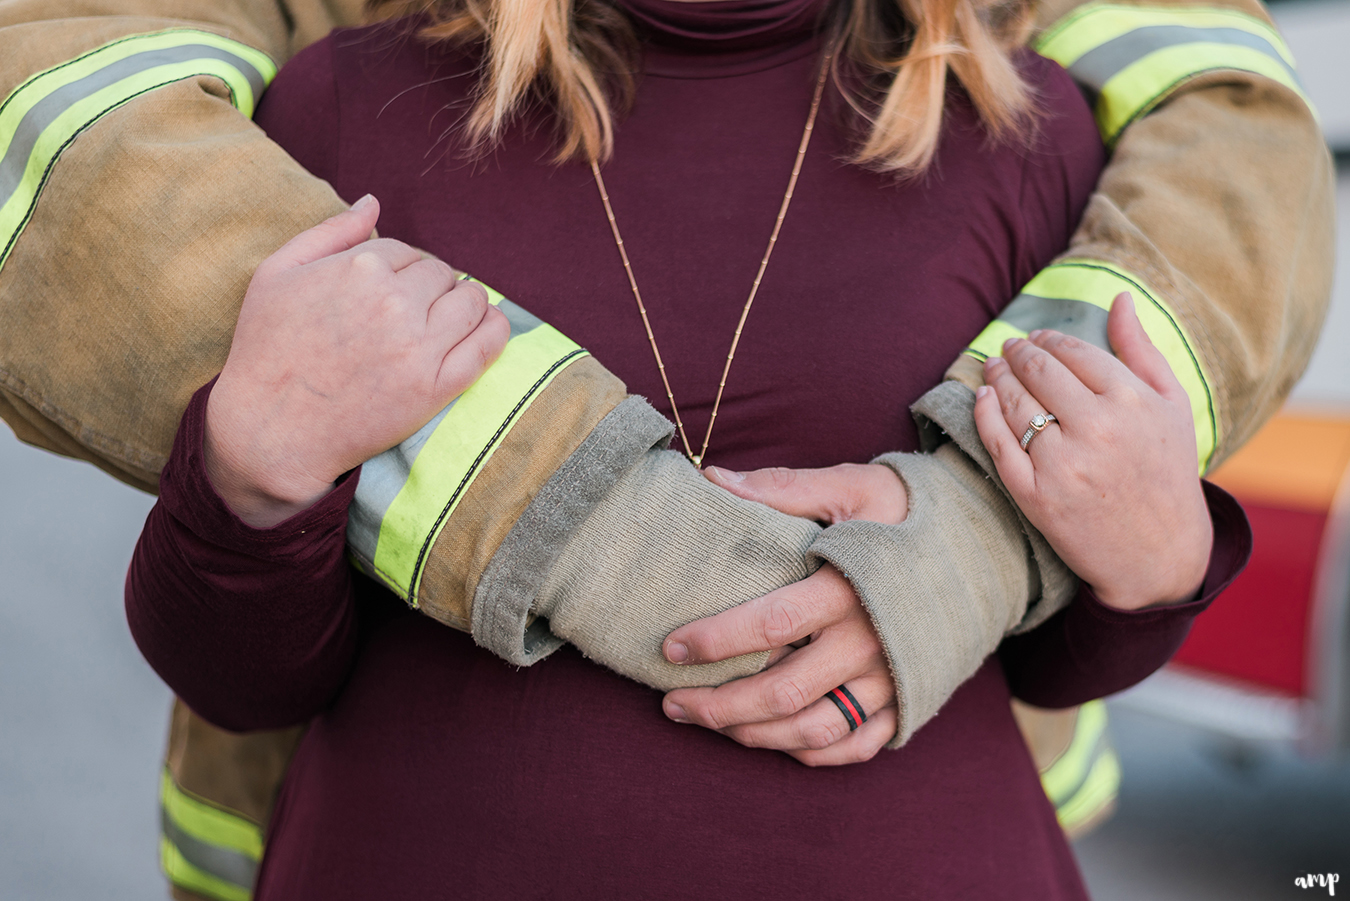 Firefighter and firefighter's wife cuddling, showing off the rings